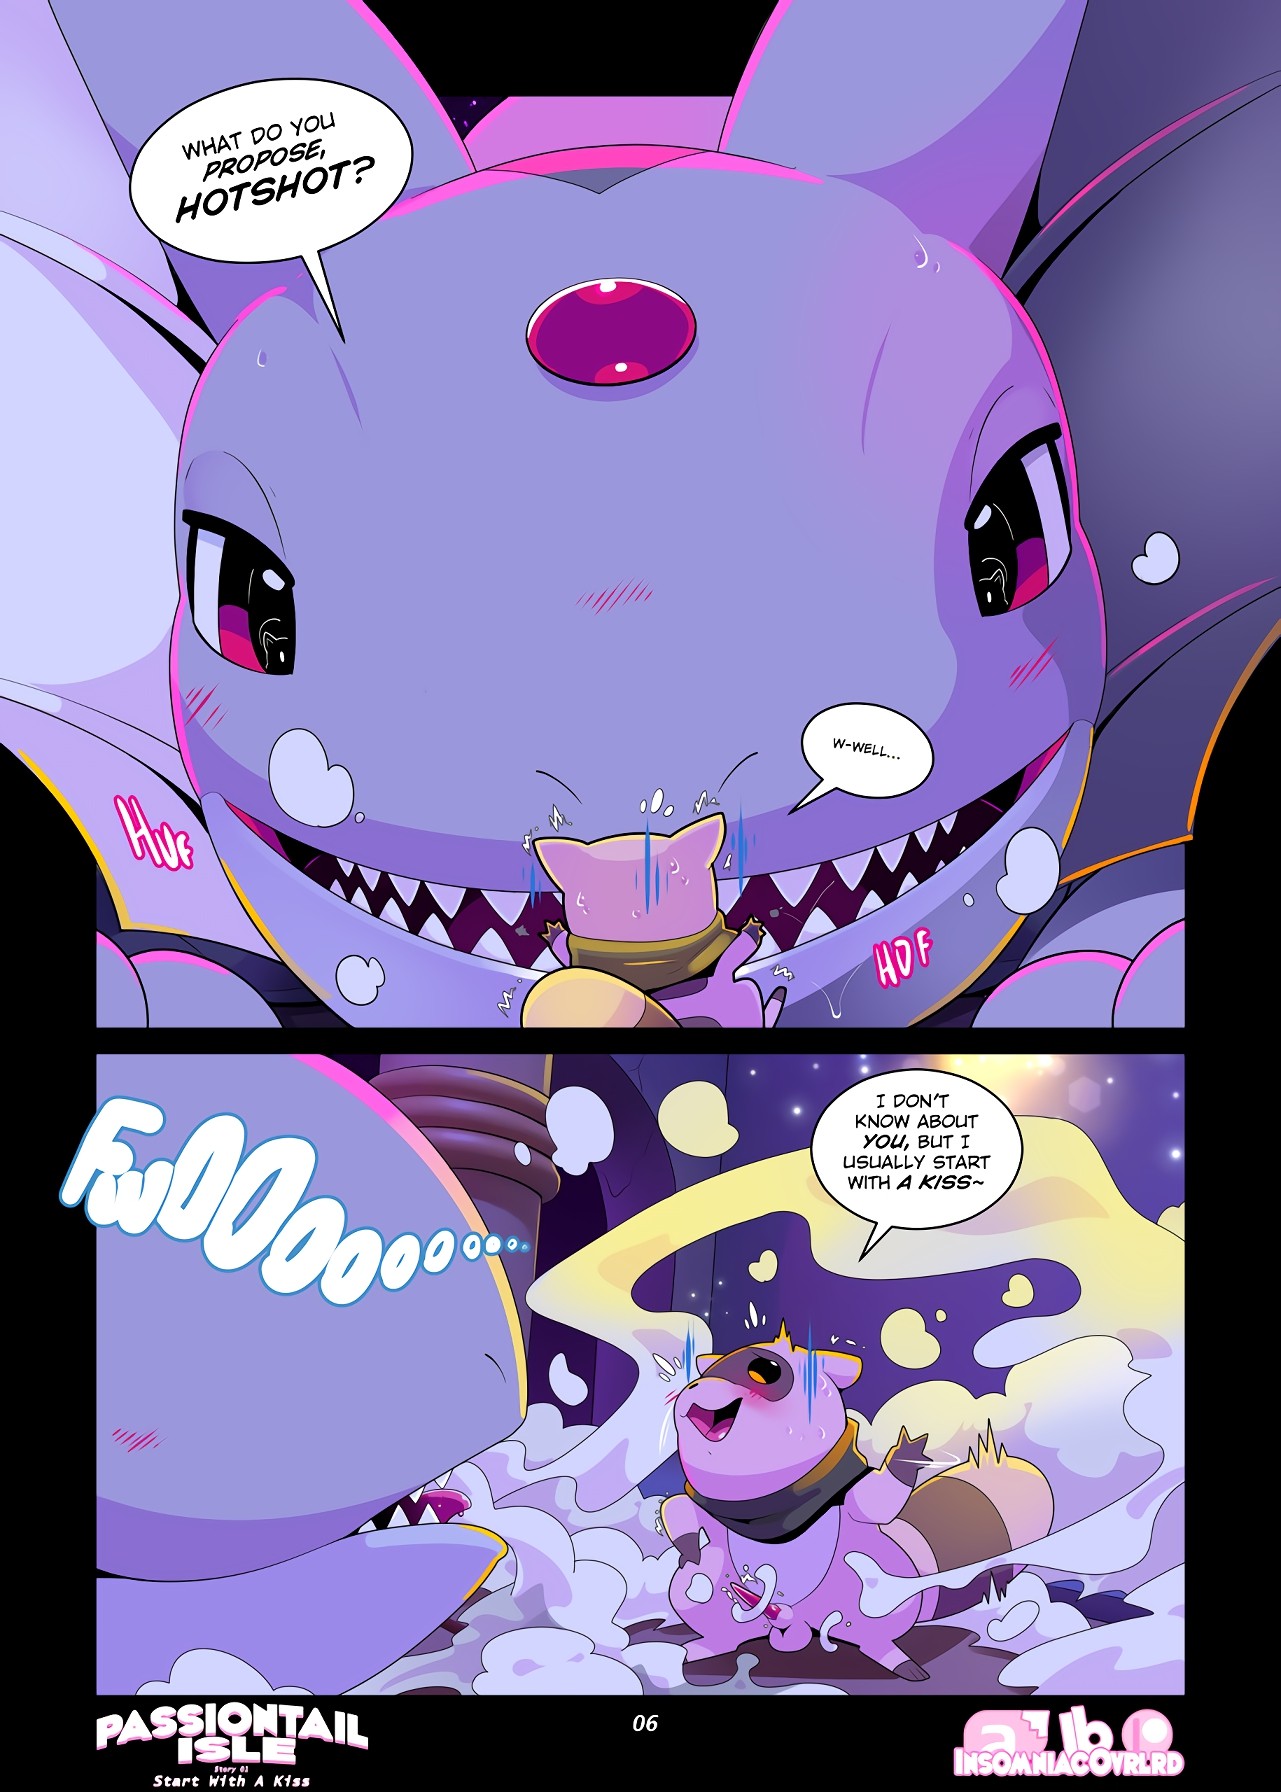 Passiontail Isle by Insomniacovrlrd porn comic picture 7